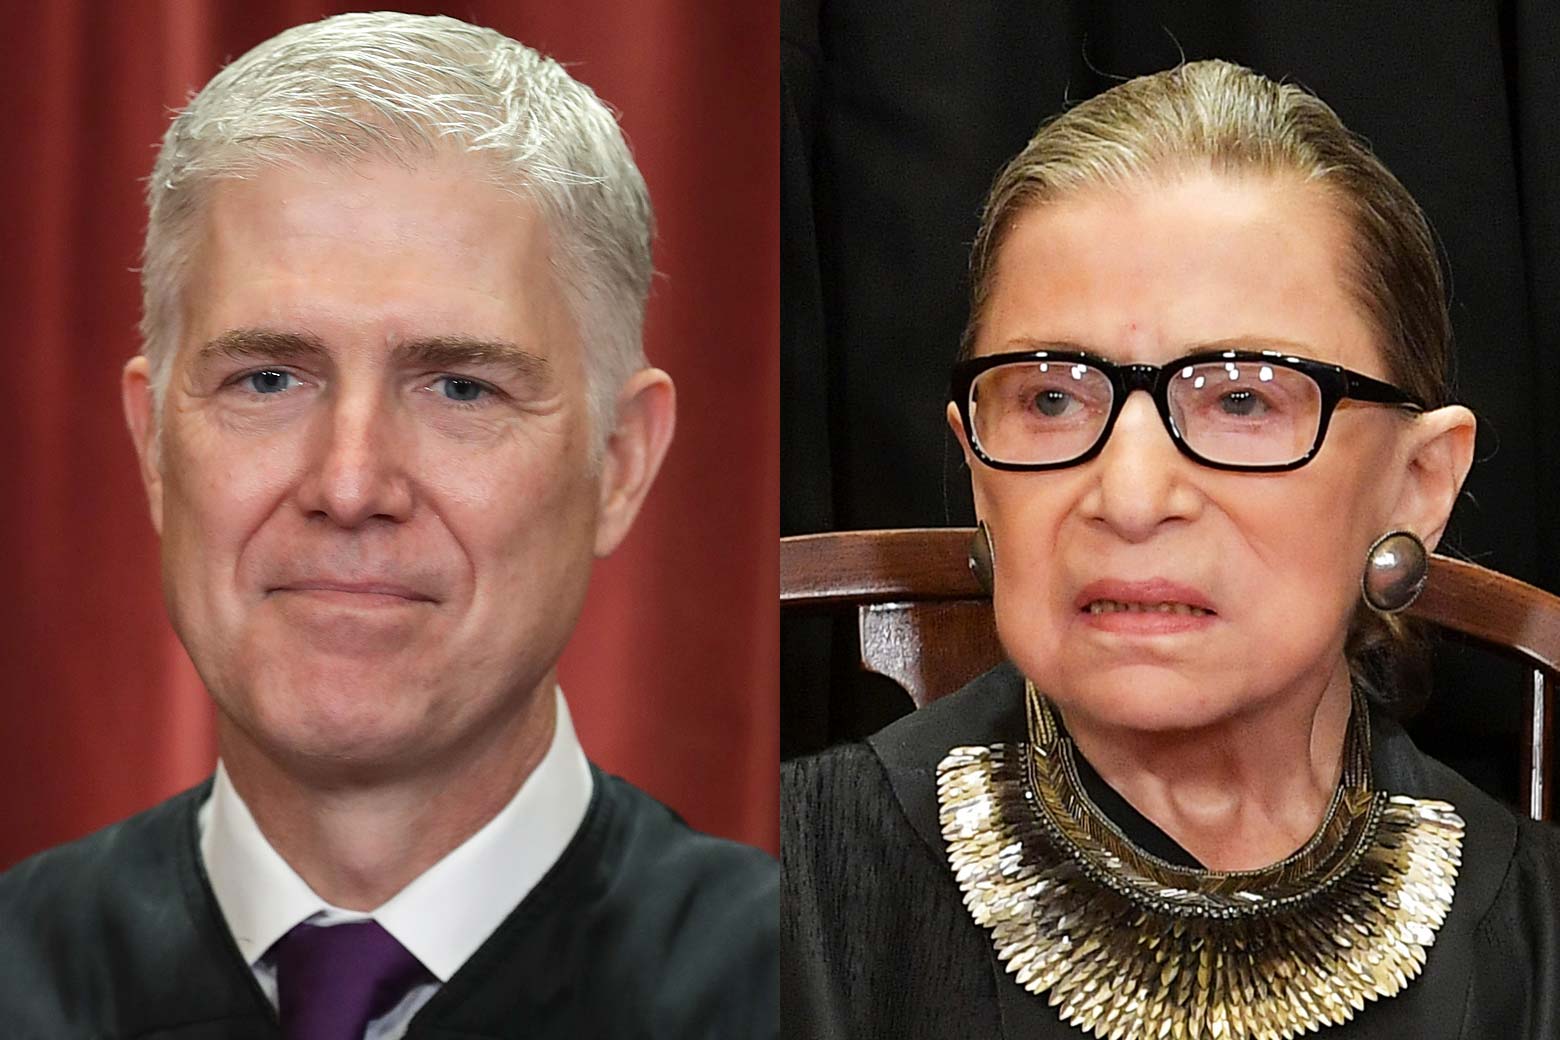 Supreme Court Justices Neil Gorsuch and Ruth Bader Ginsburg